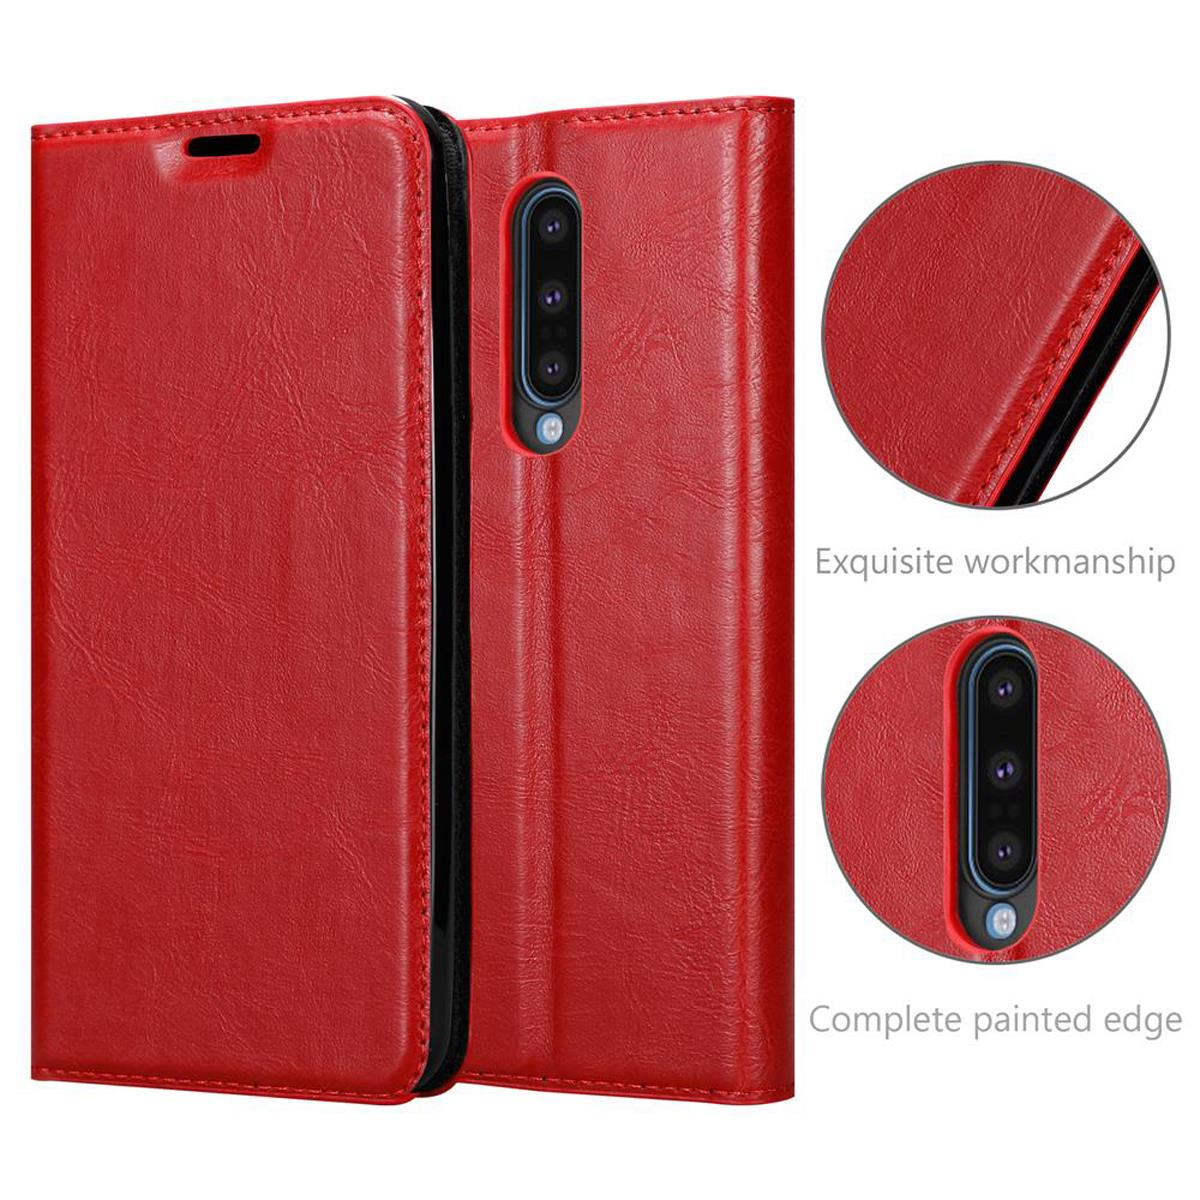 CADORABO Book Hülle Invisible 8, ROT OnePlus, Bookcover, Magnet, APFEL